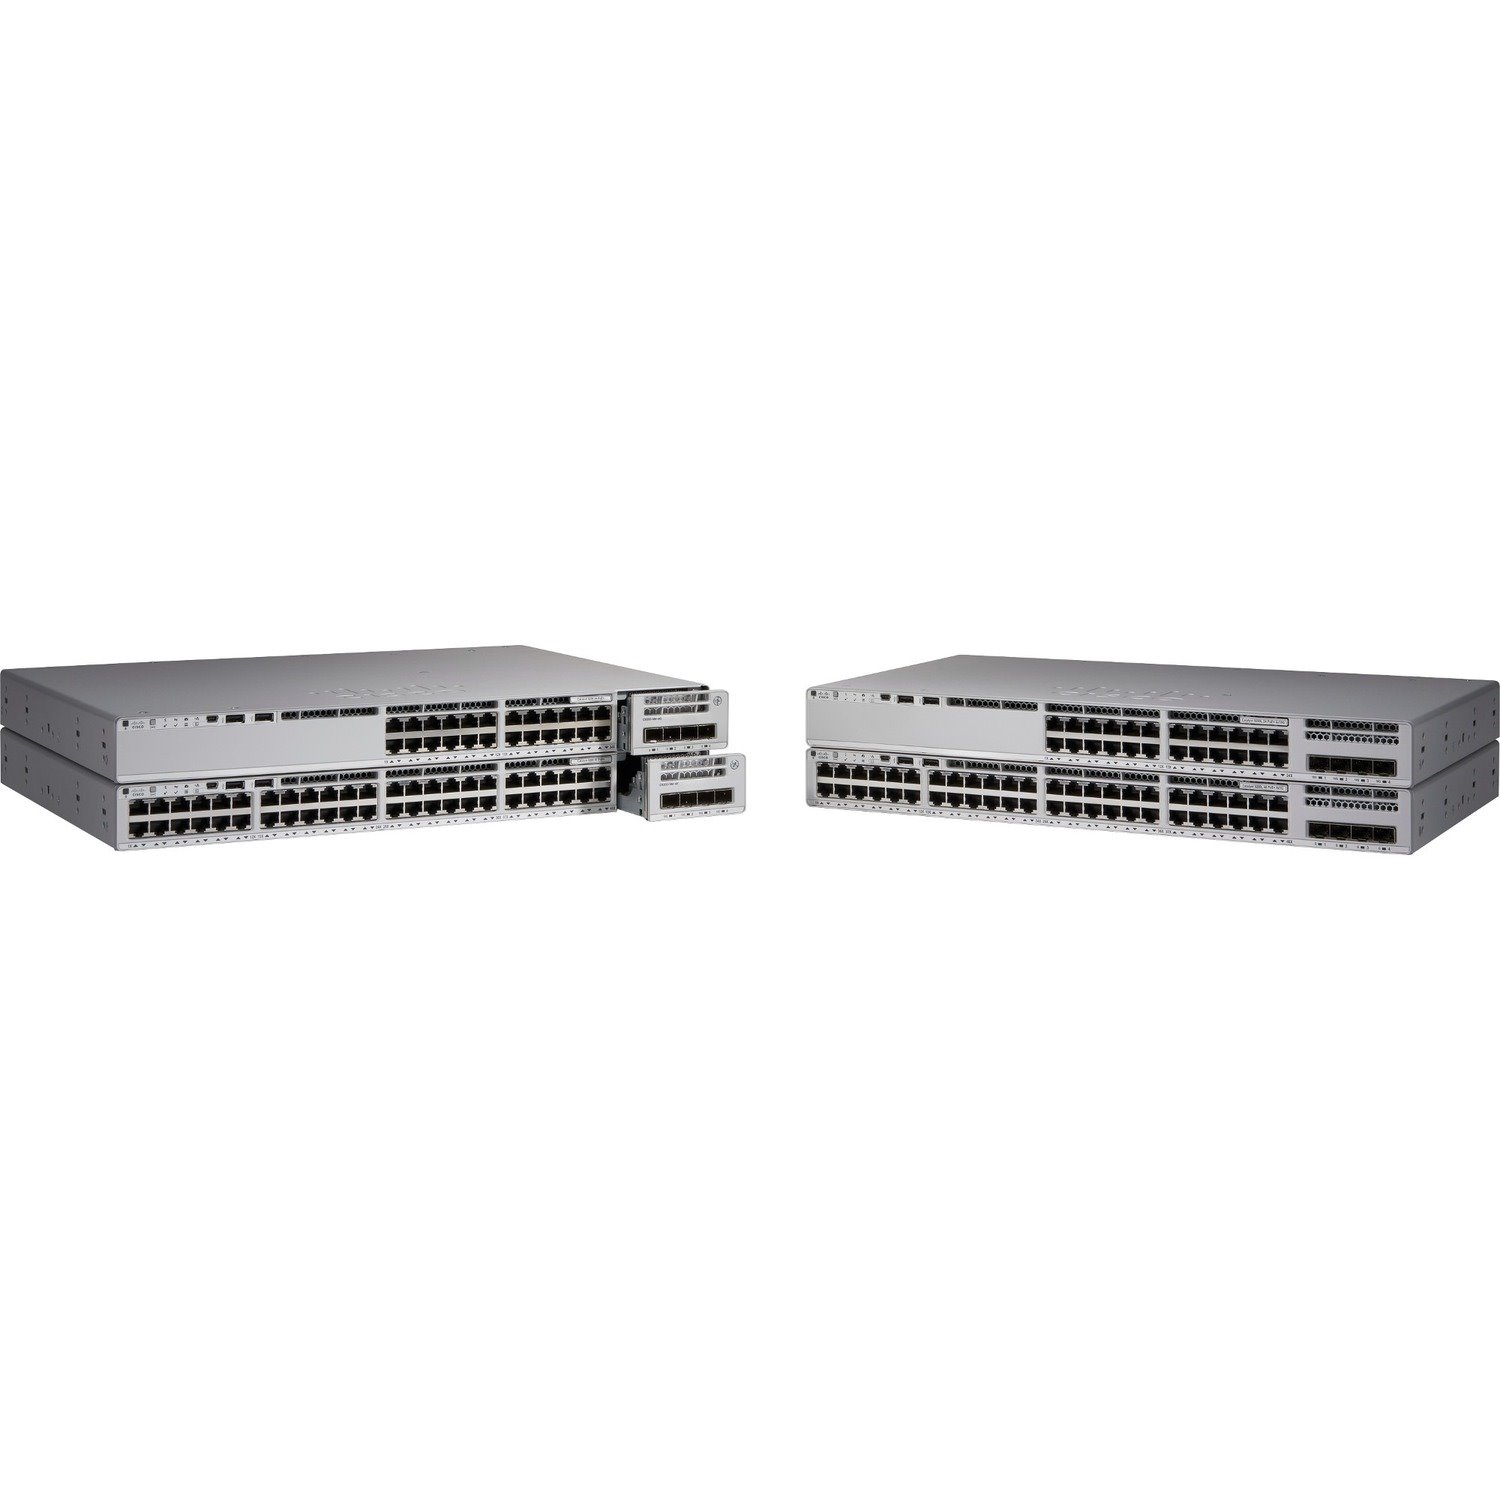 Cisco Catalyst 9200 C9200L-48T-4X 48 Ports Manageable Ethernet Switch - Refurbished